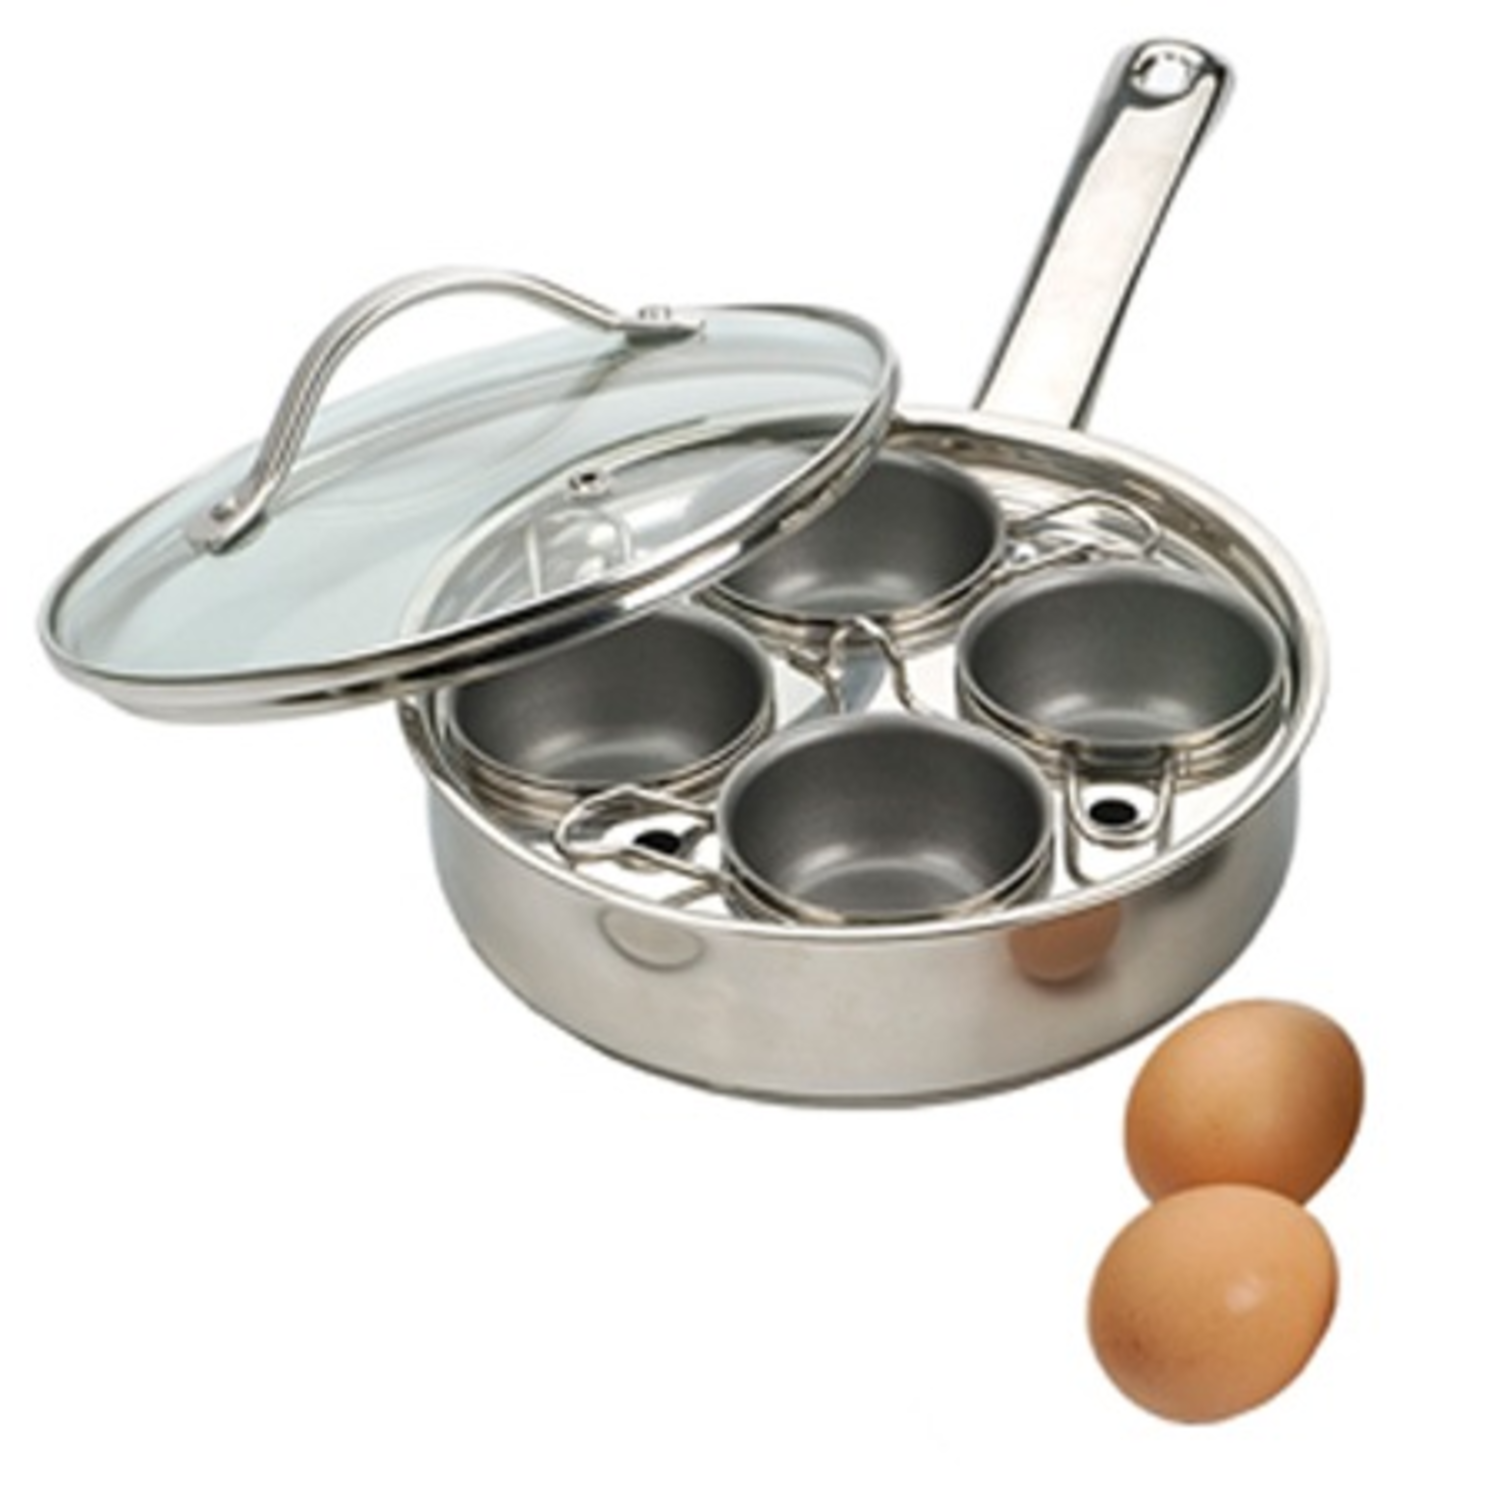 Cooks Standard 4 Cup Nonstick Hard Anodized Egg Poacher Pan with